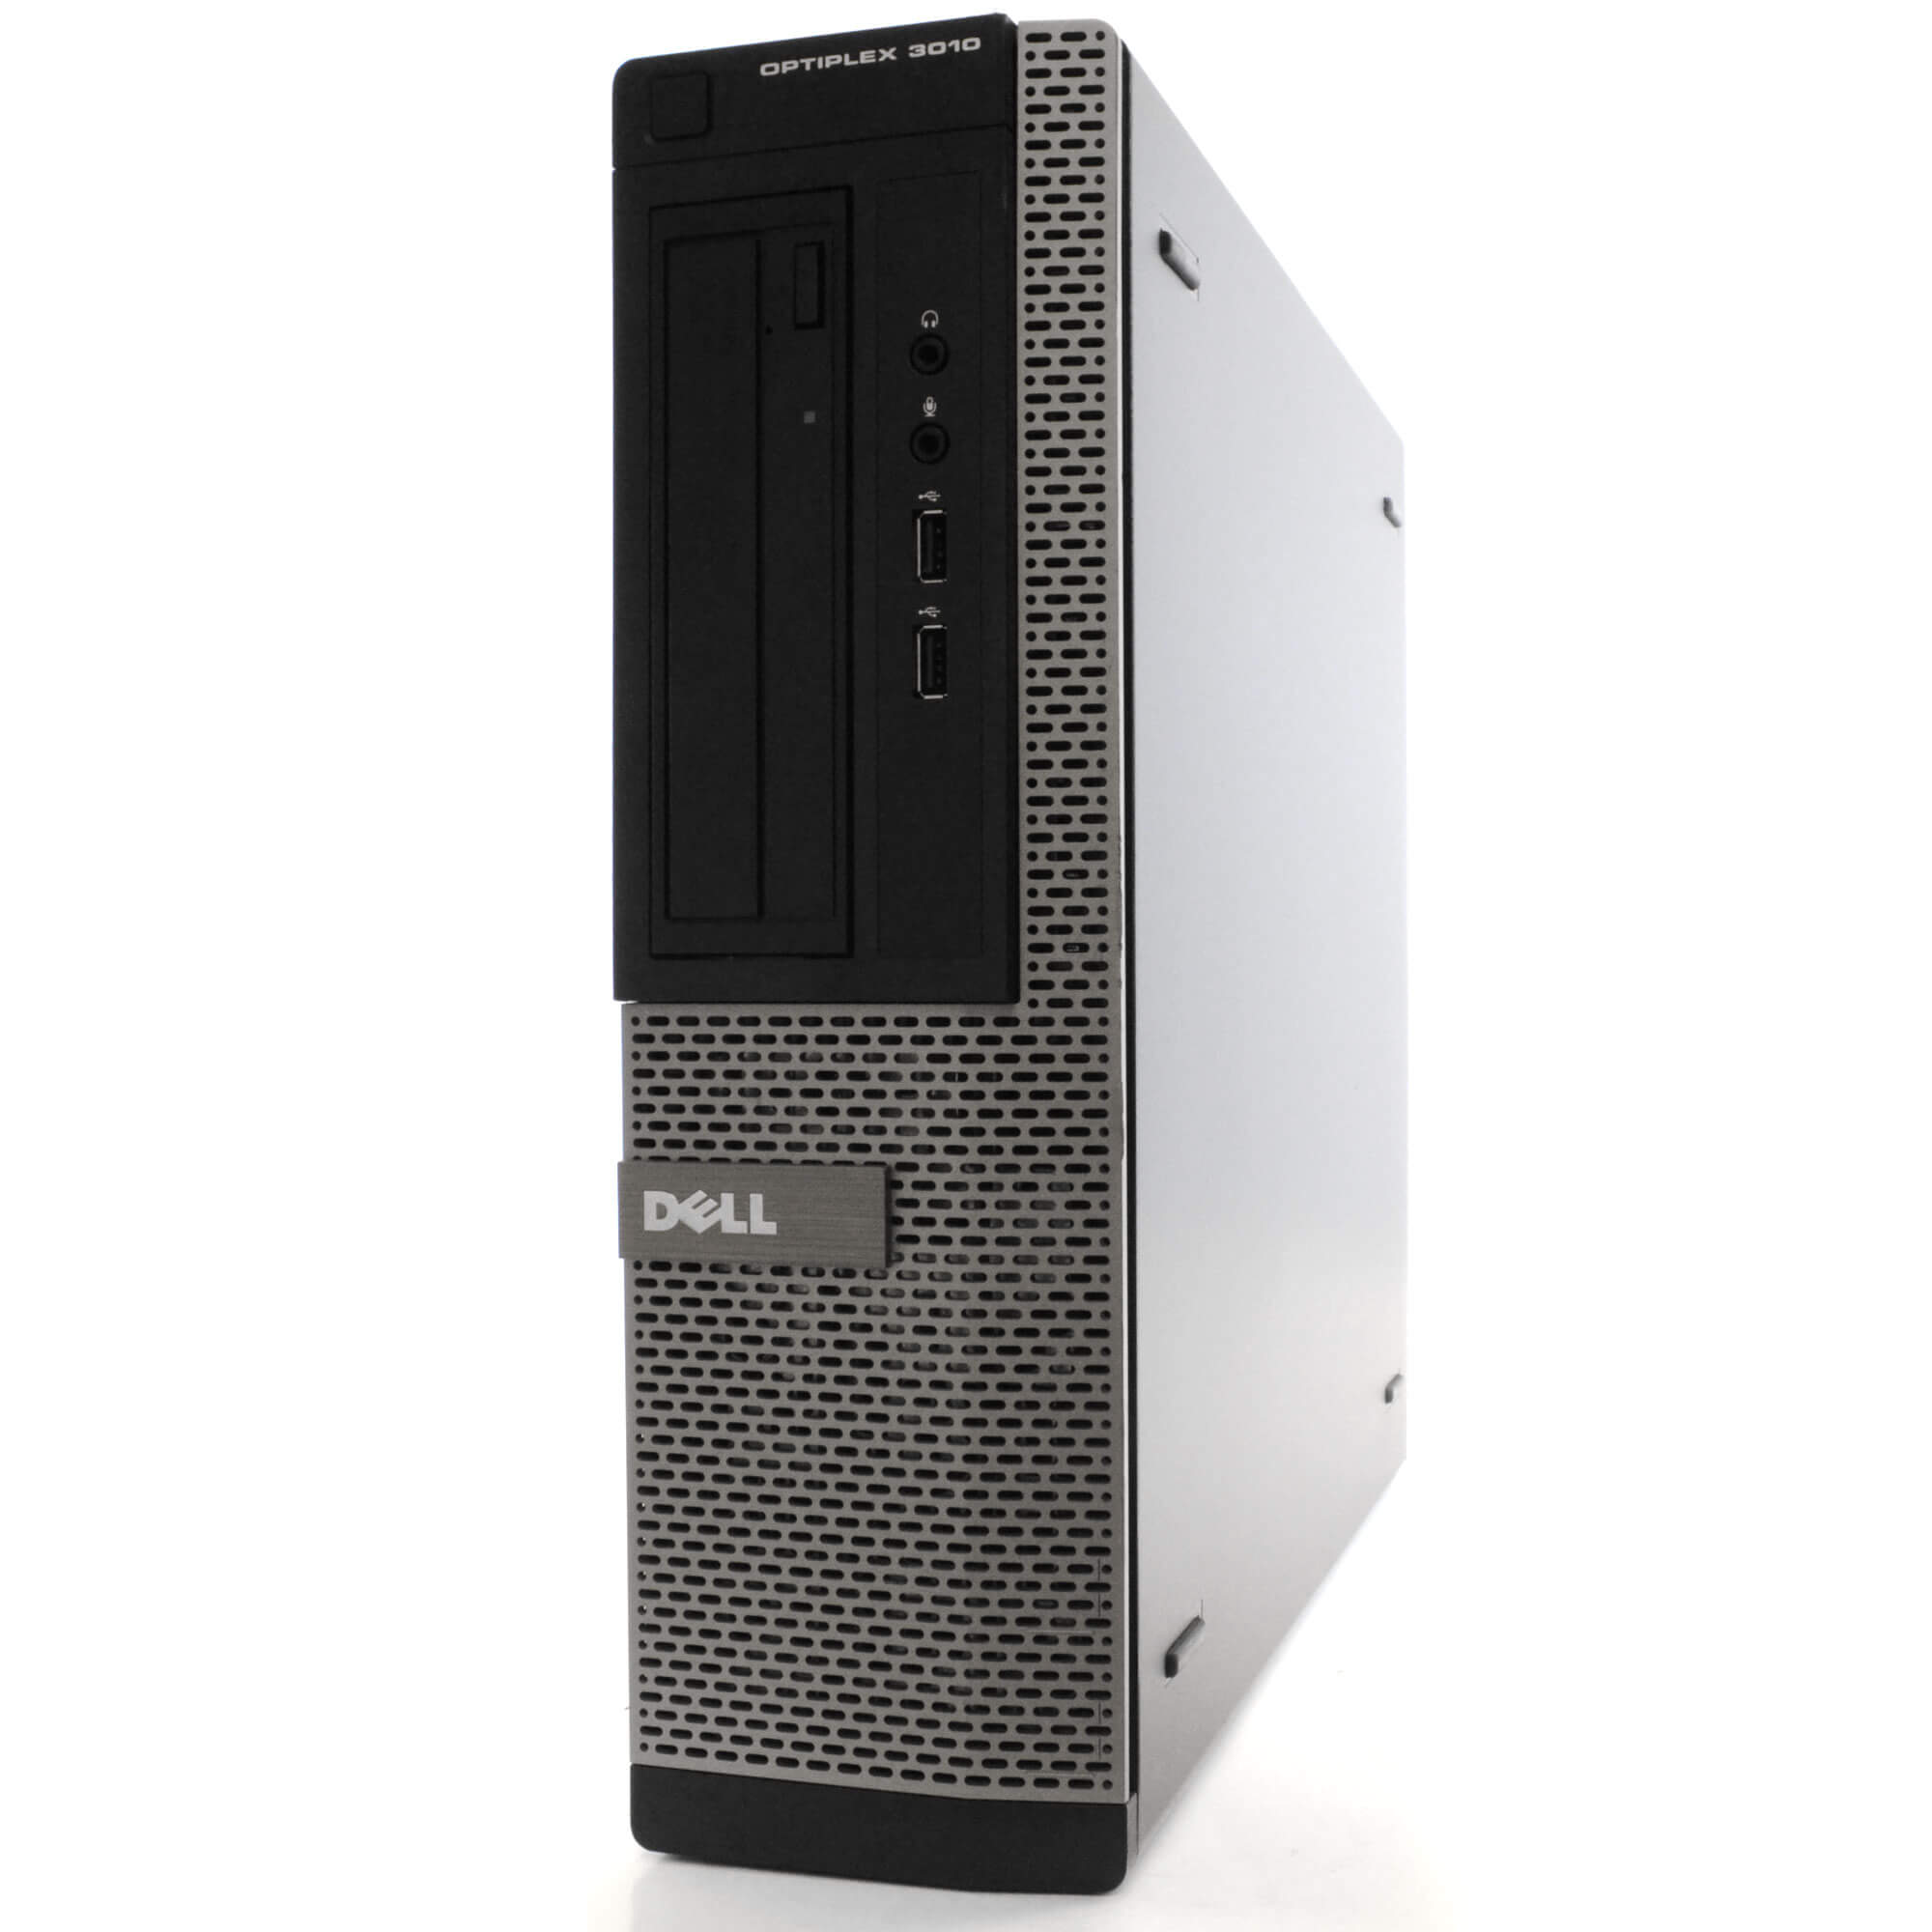 DELL Optiplex 3010 Desktop Computer PC, Intel Quad-Core i5, 500GB HDD, 4GB DDR3 RAM, Windows 10 Home, DVD, WIFI, 19in Monitor, USB Keyboard and Mouse (Used - Like New) - image 5 of 9